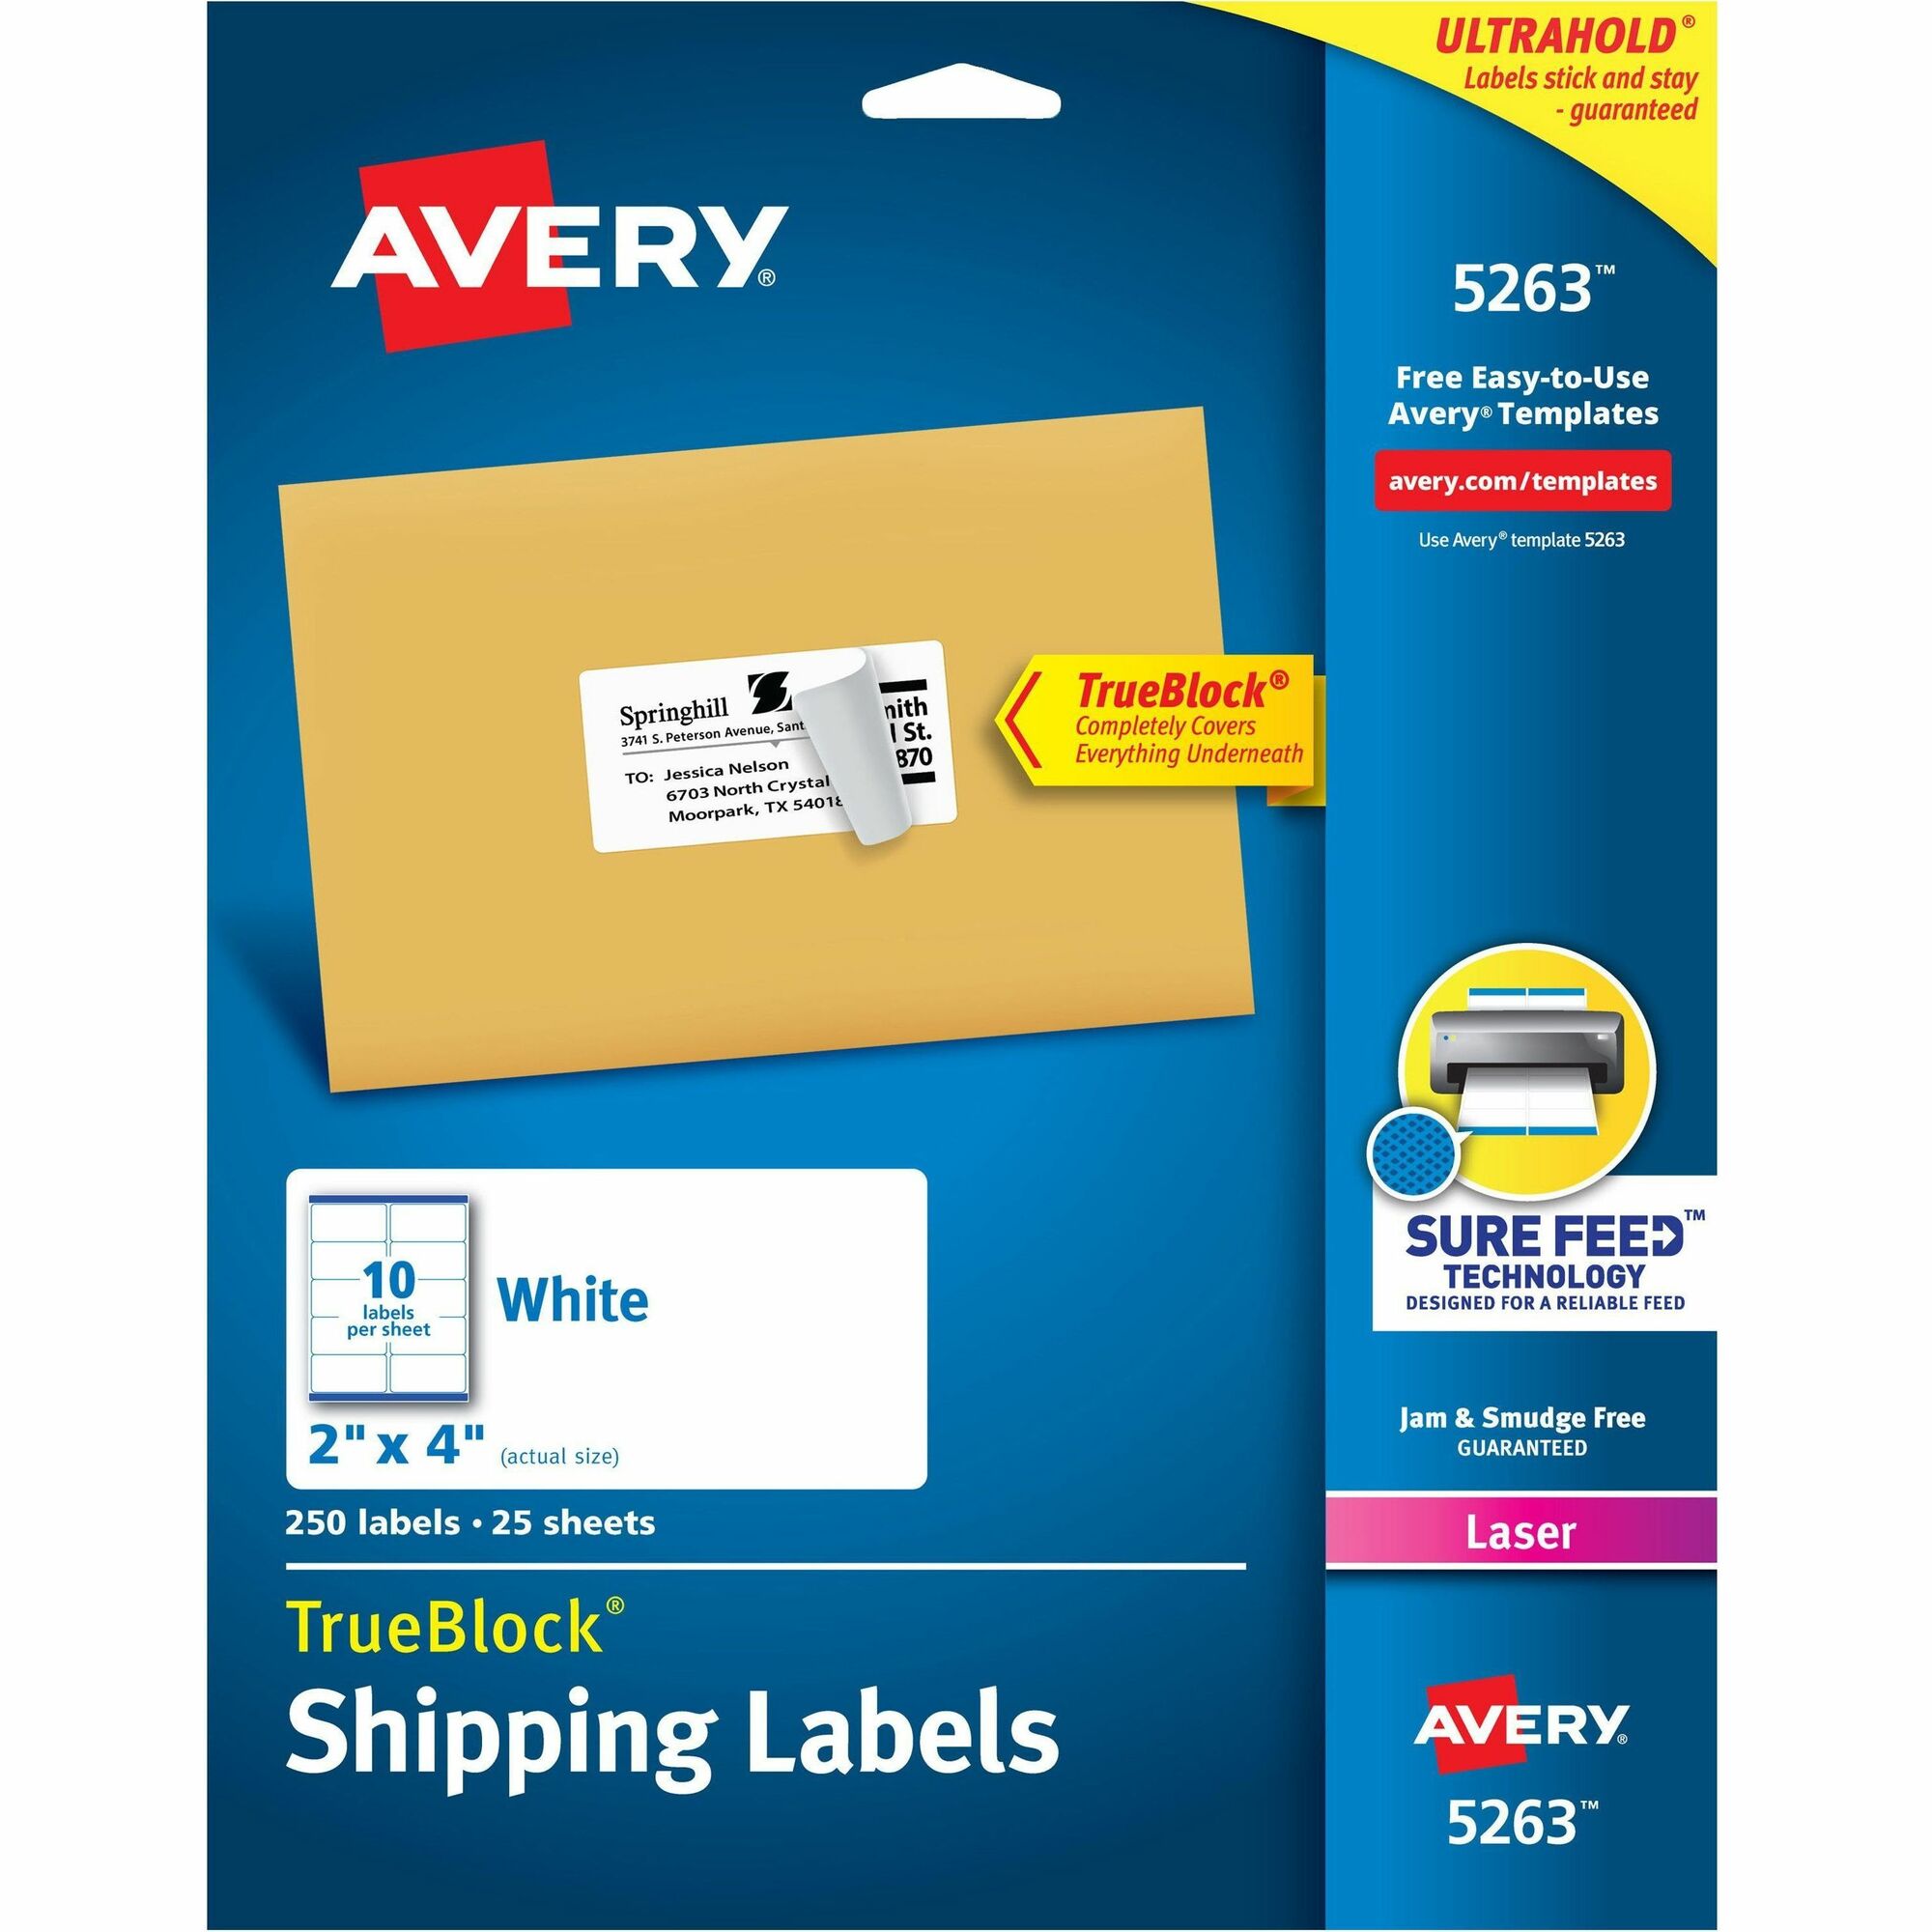 avery-5263-template-free